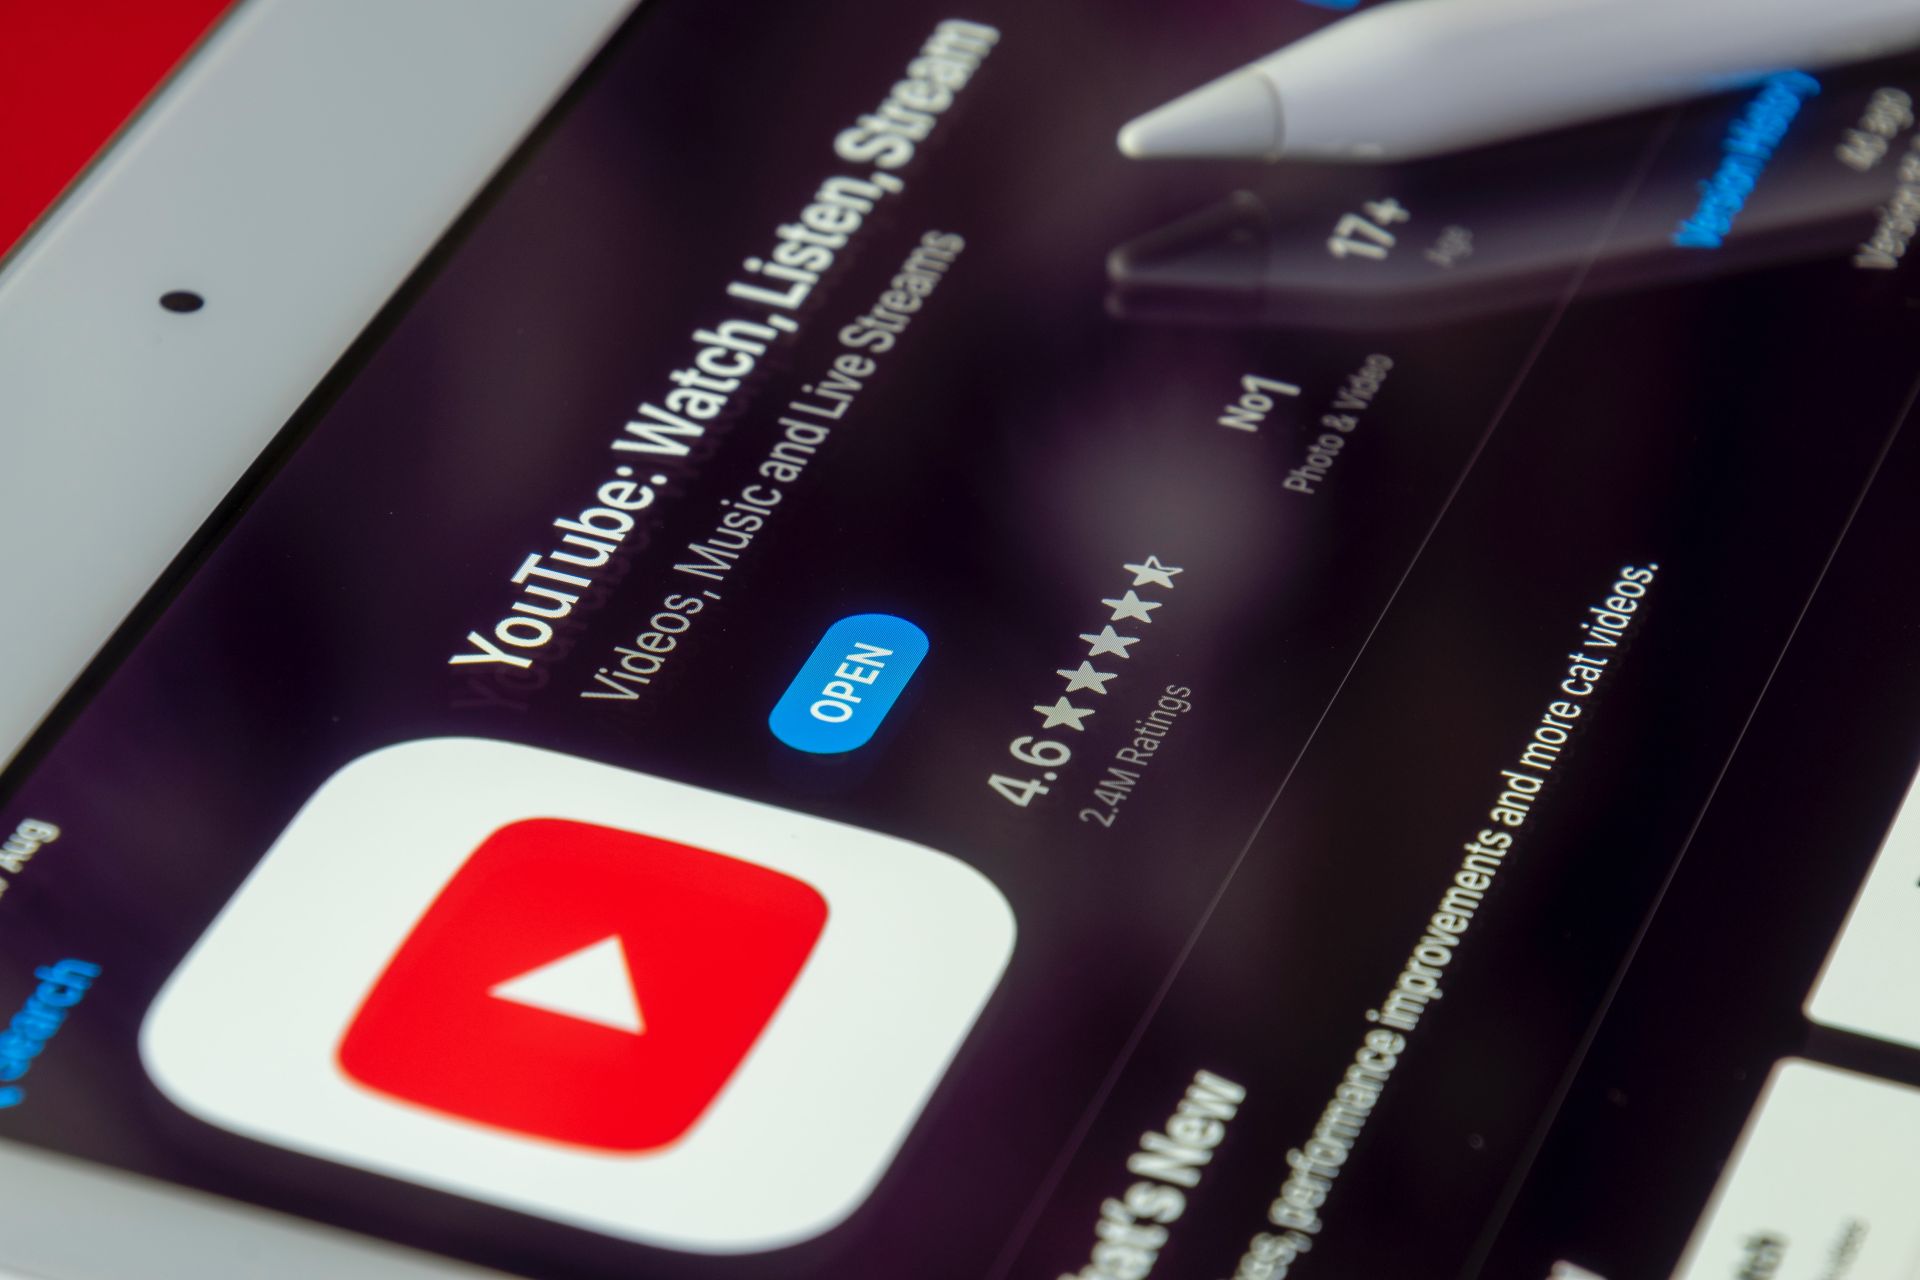 YouTube partners with UMG but copyright issues might persist